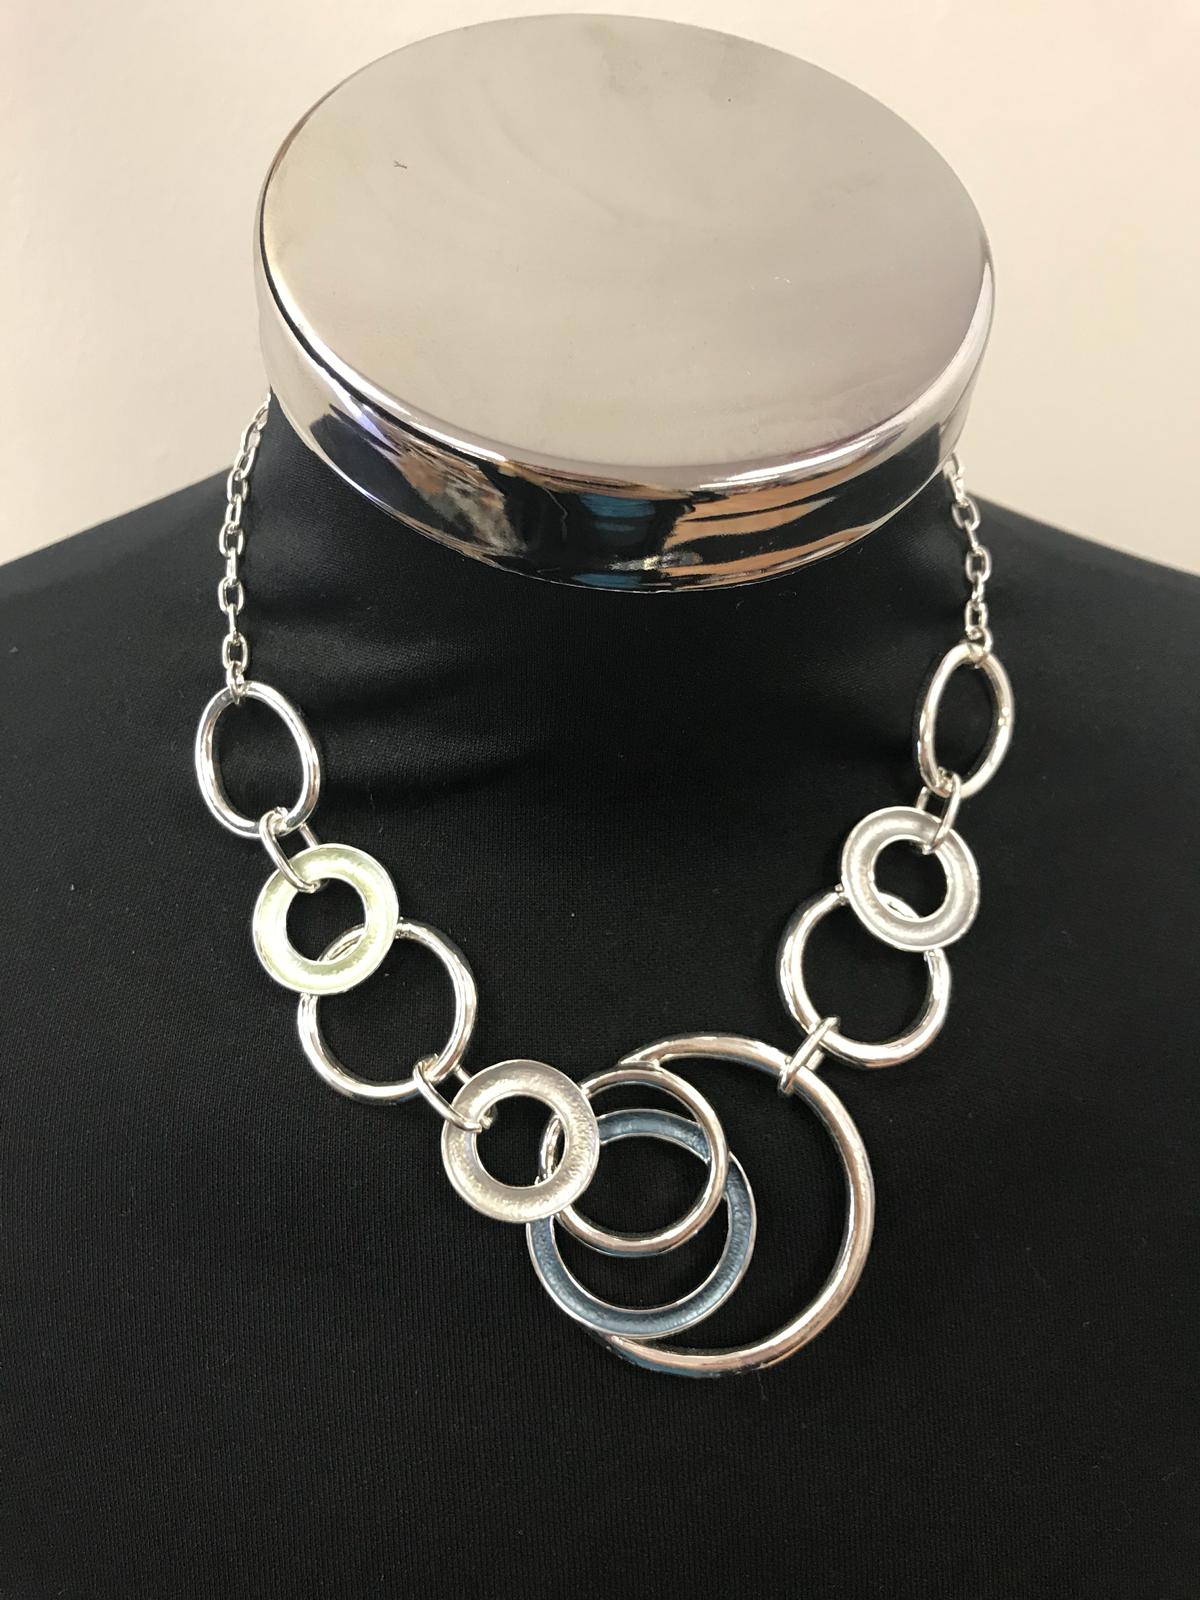 Enameled Style Necklace and Earrings Set with Concentric Circles